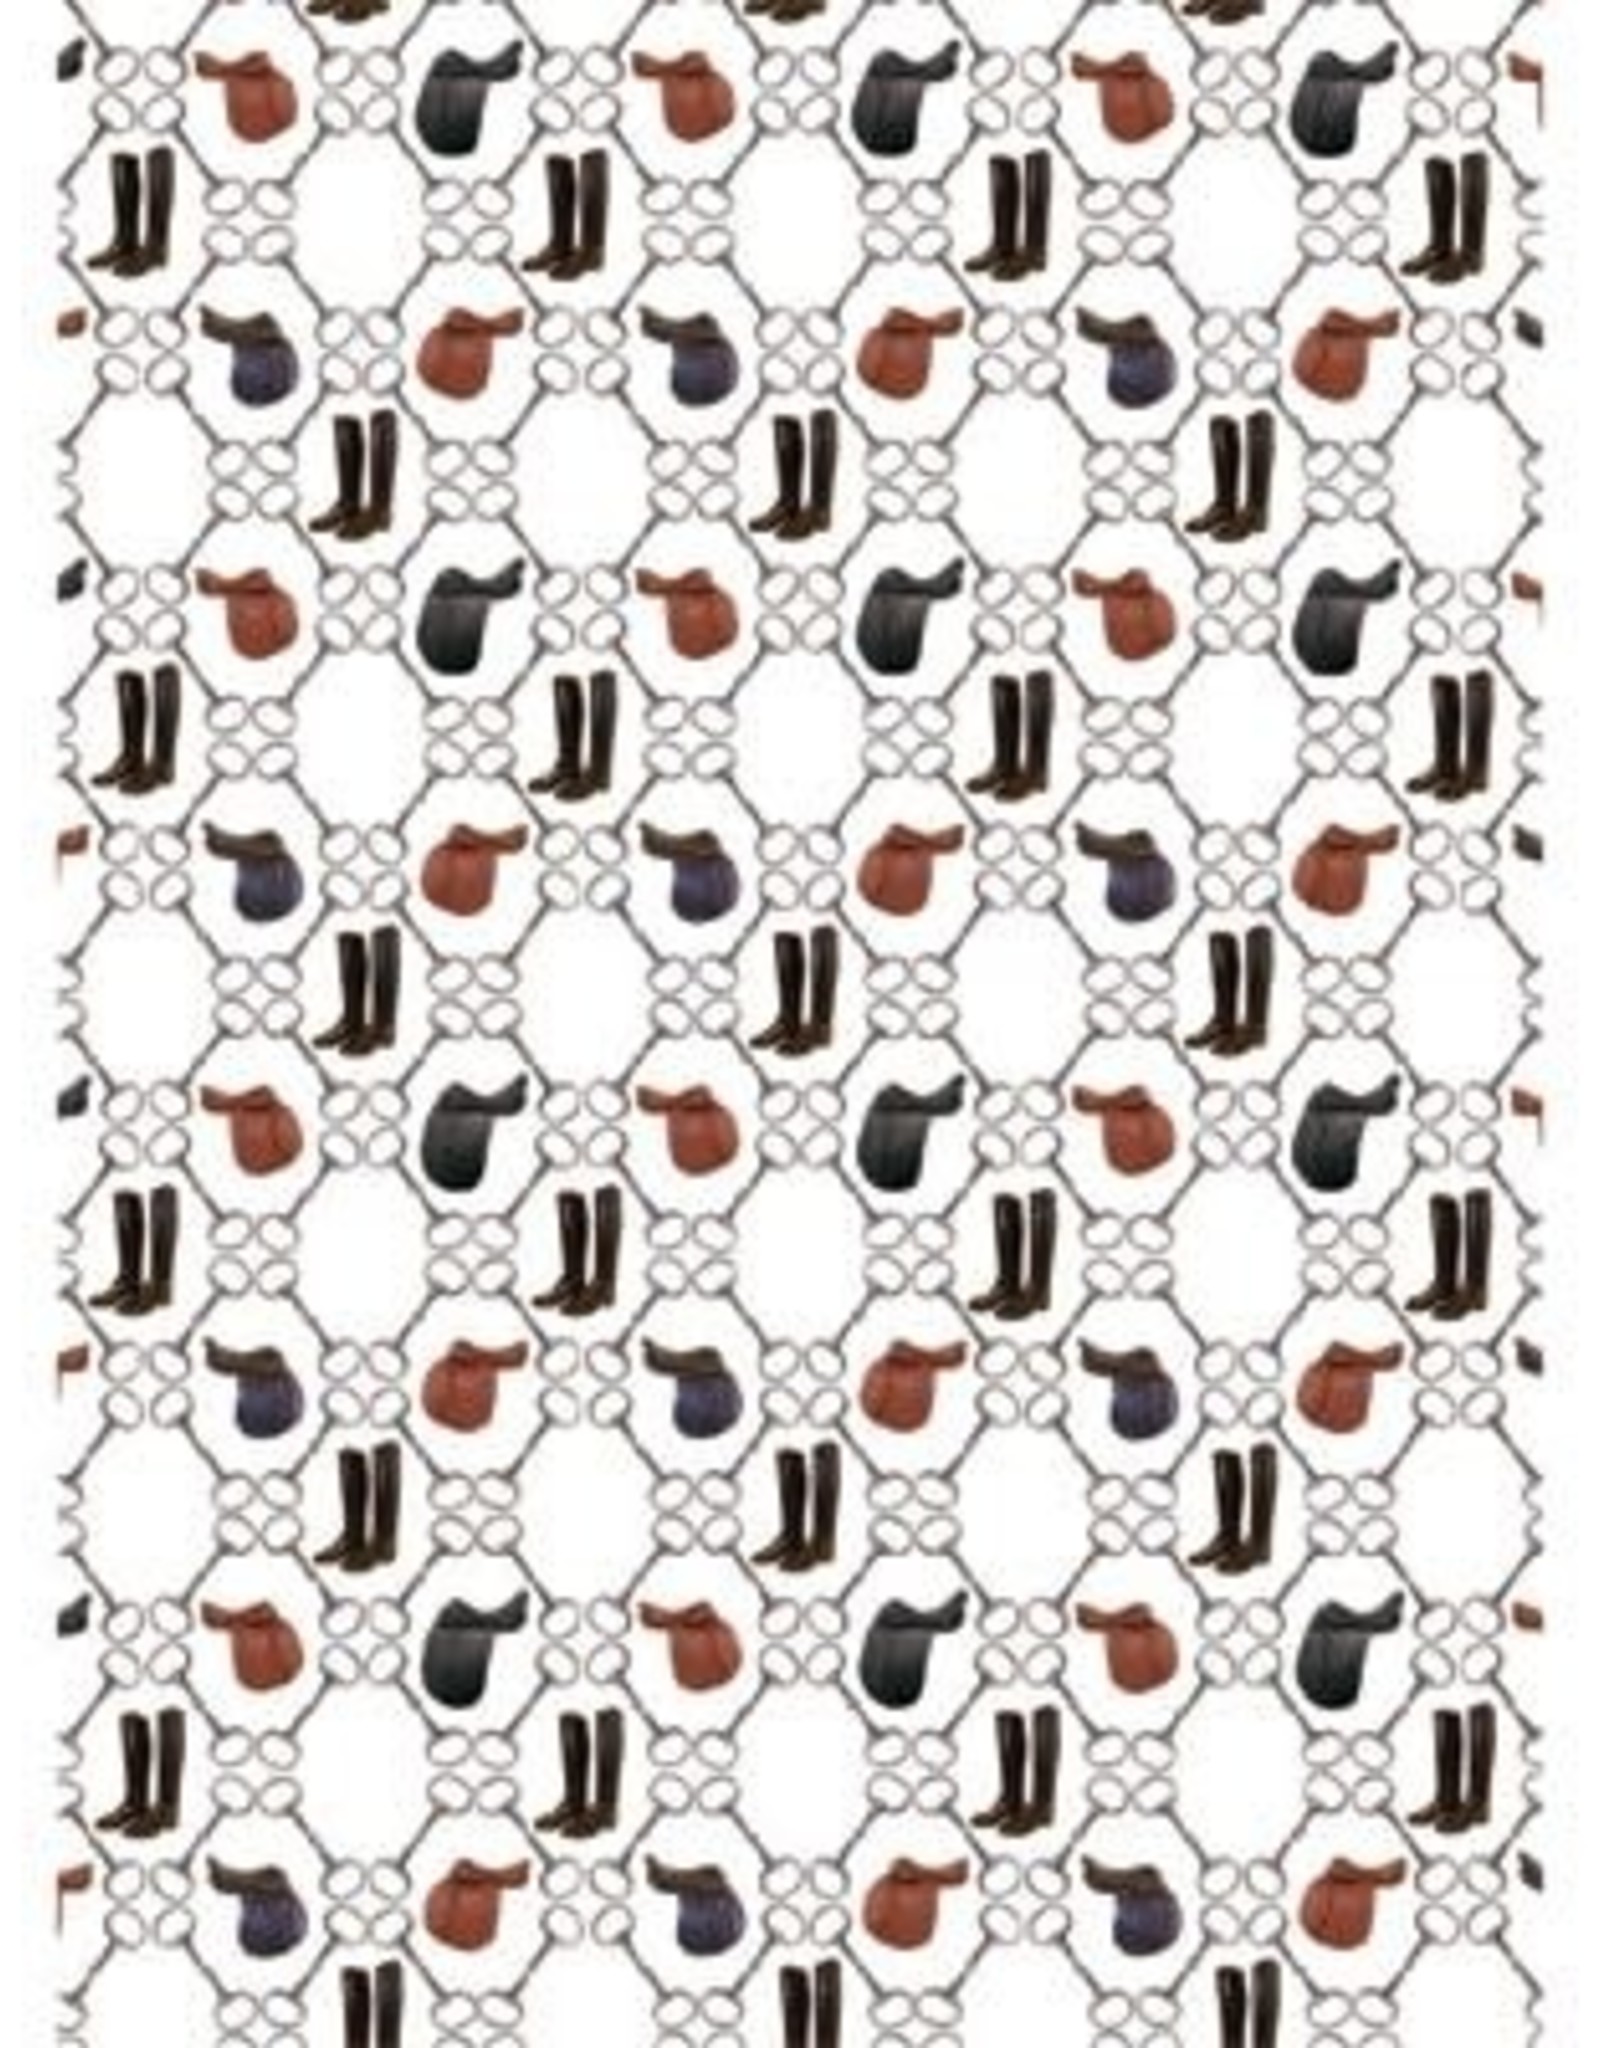 English Theme Wrapping Paper